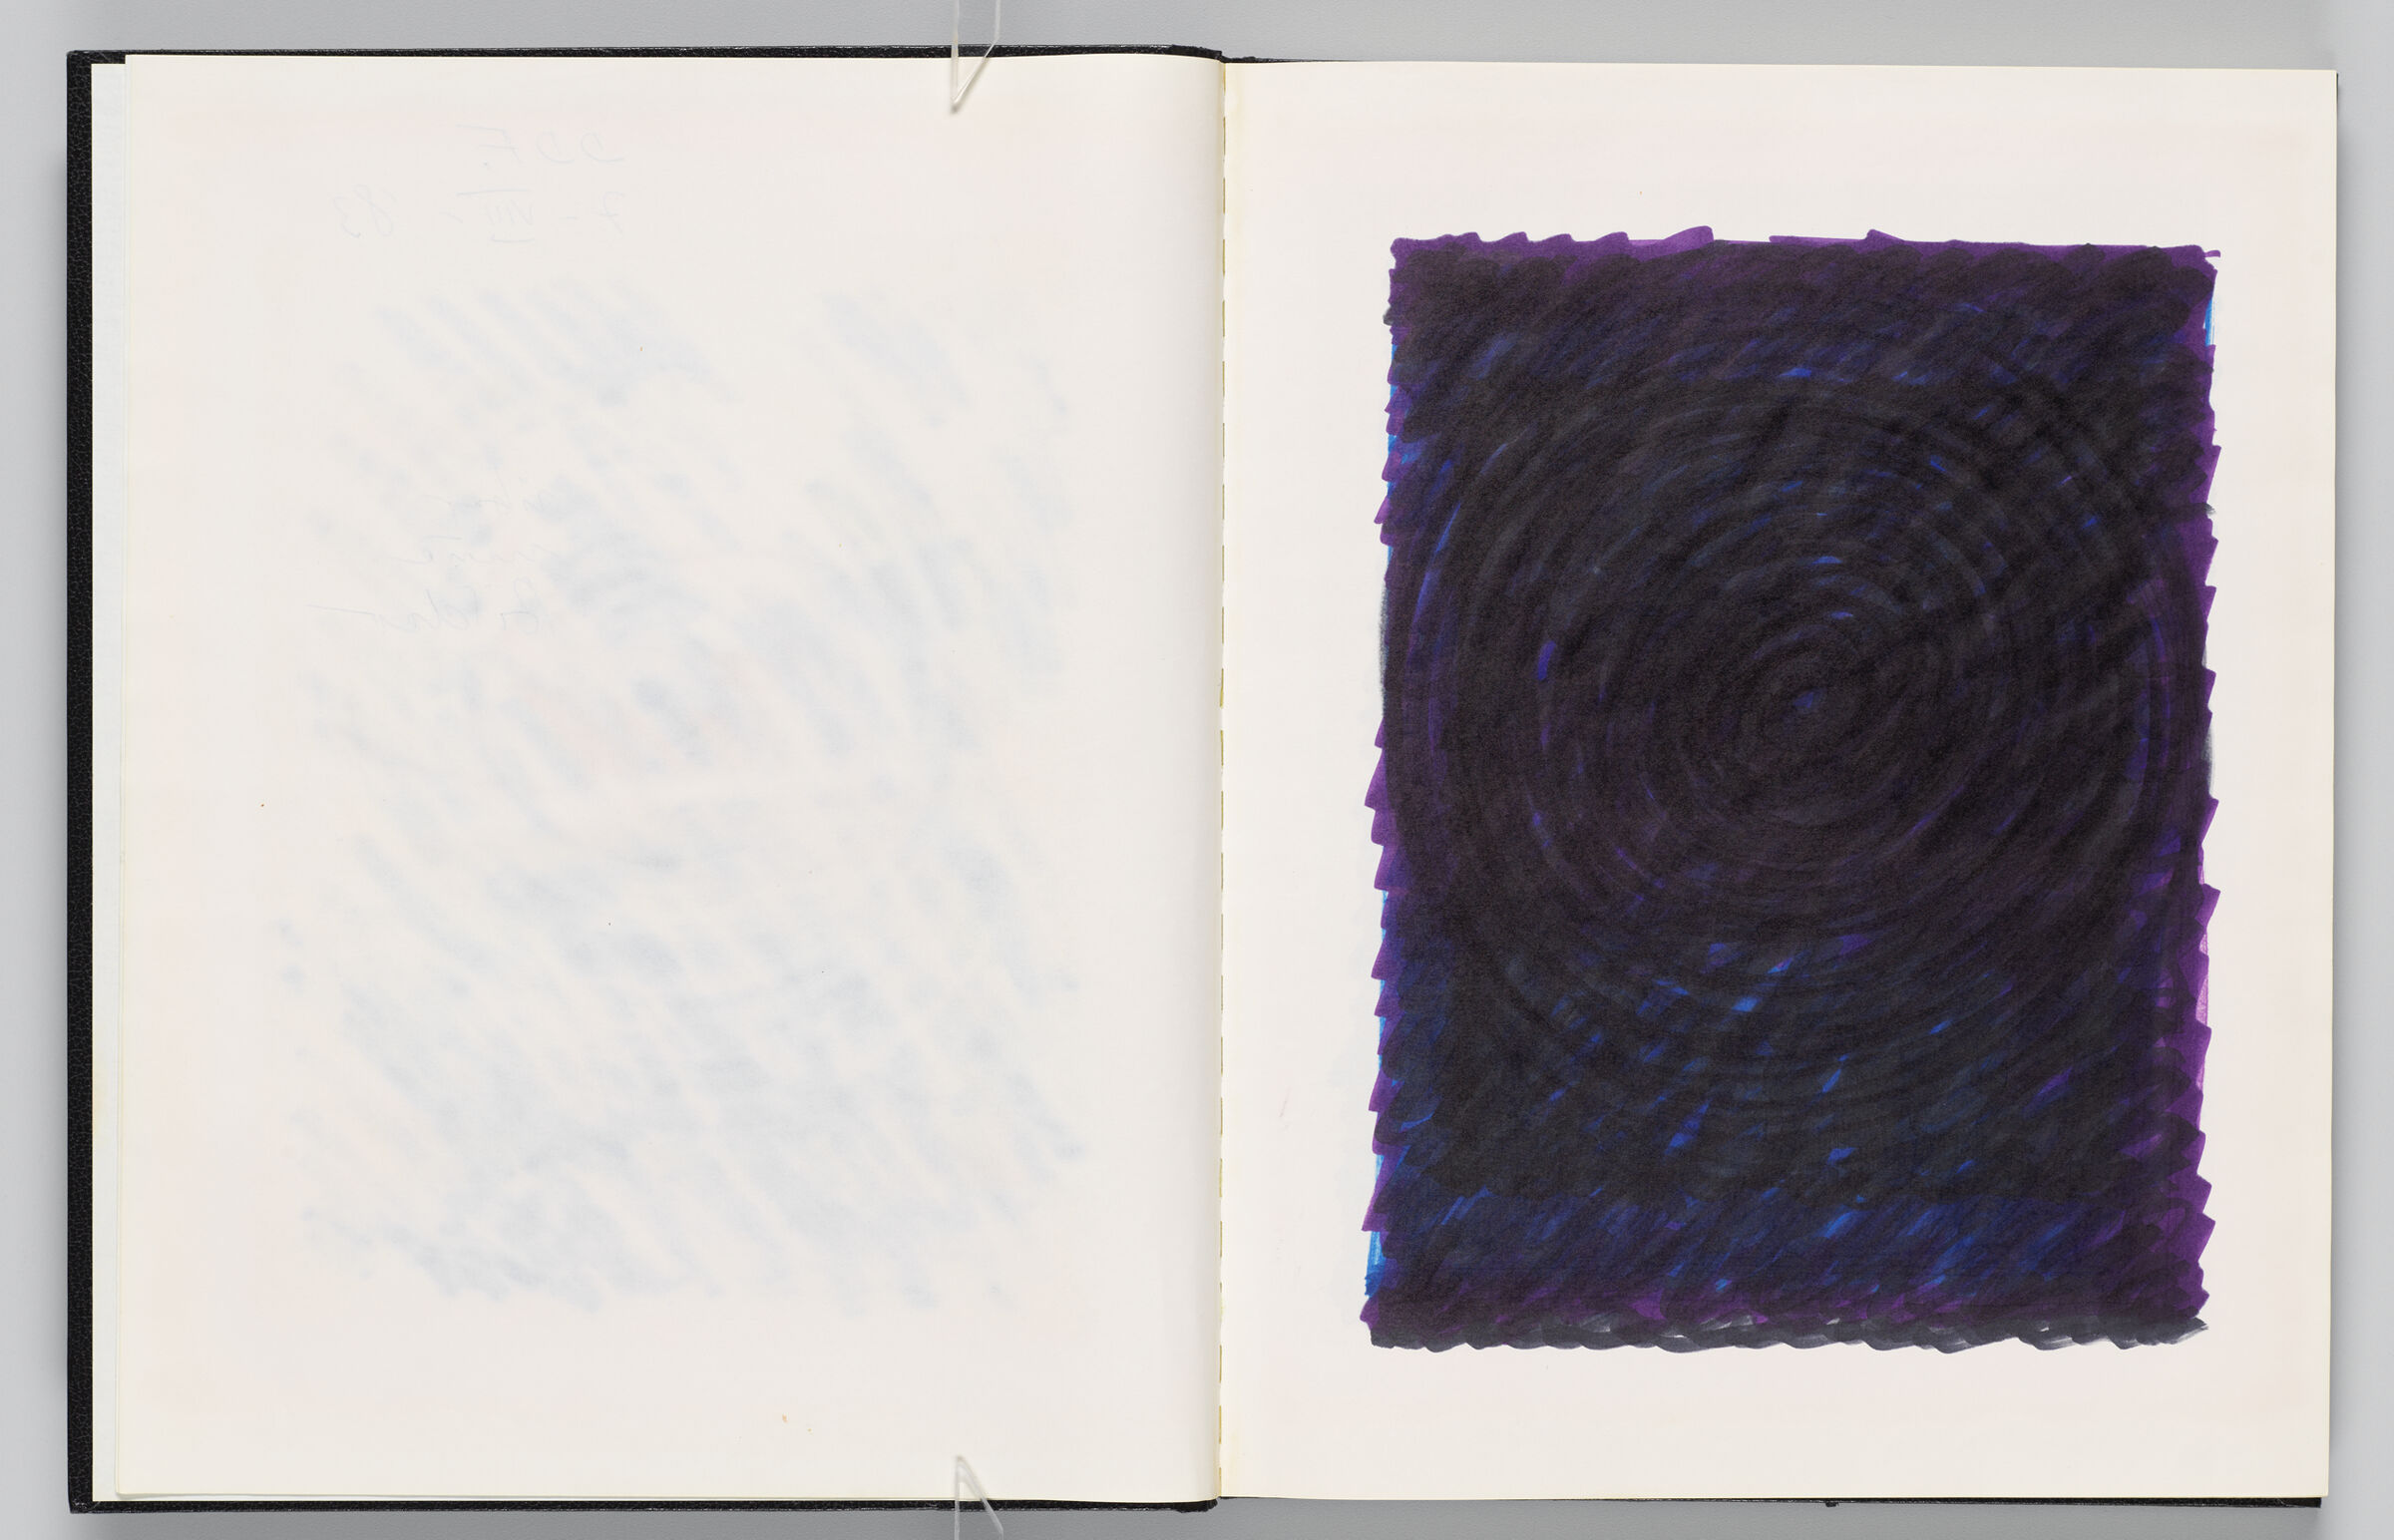 Untitled (Blank, Left Page); Untitled (Sketch Of Painting, Right Page)